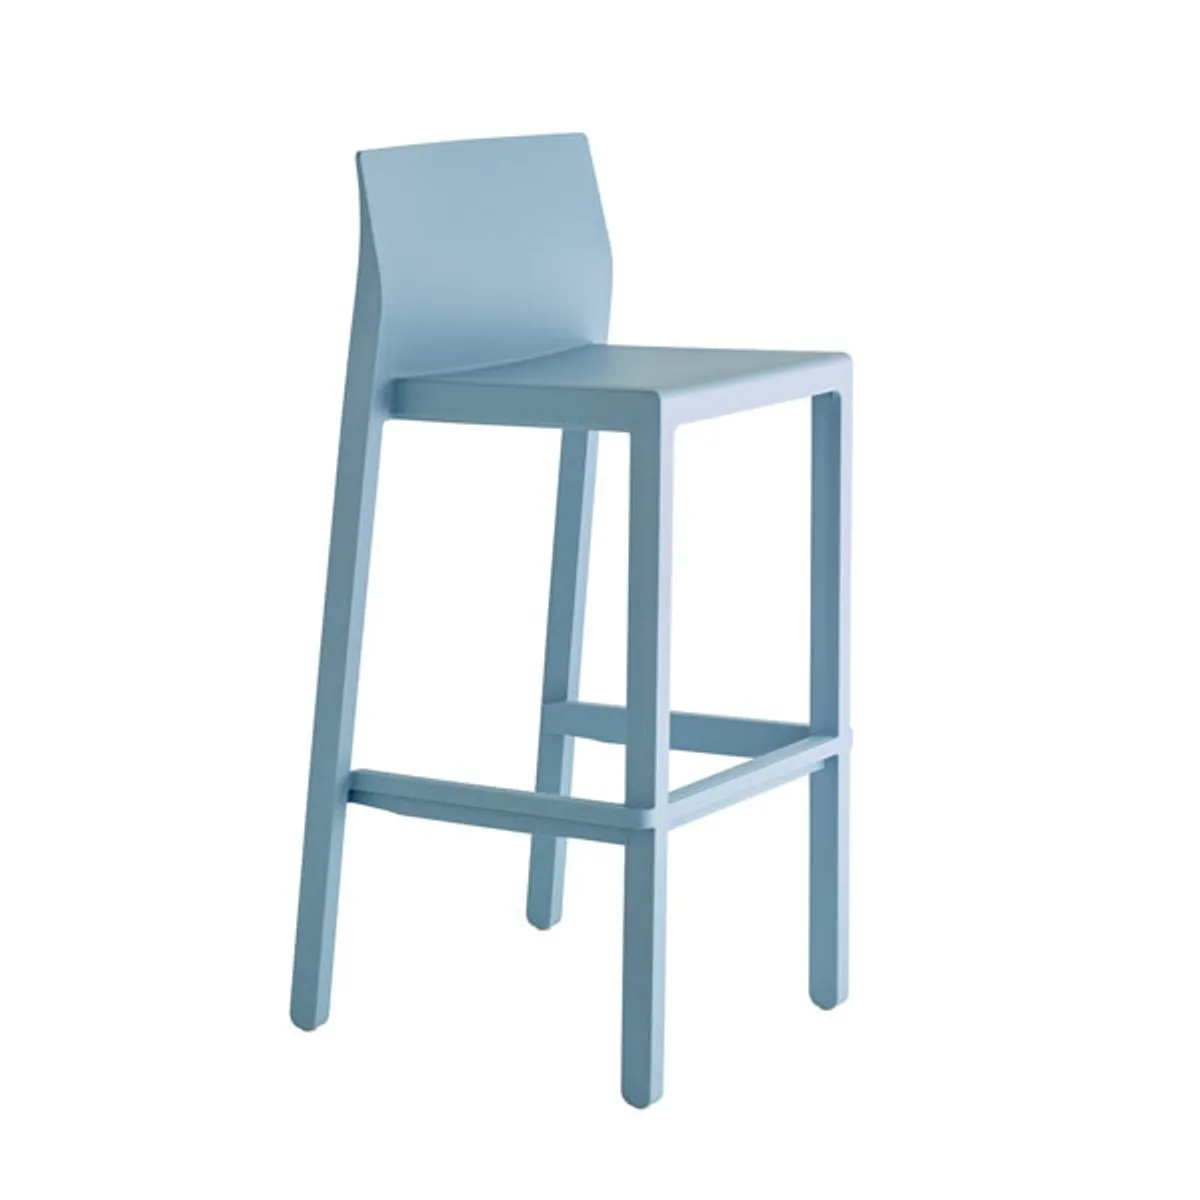 Remi bar stool bar height 7 Inside Out Contracts